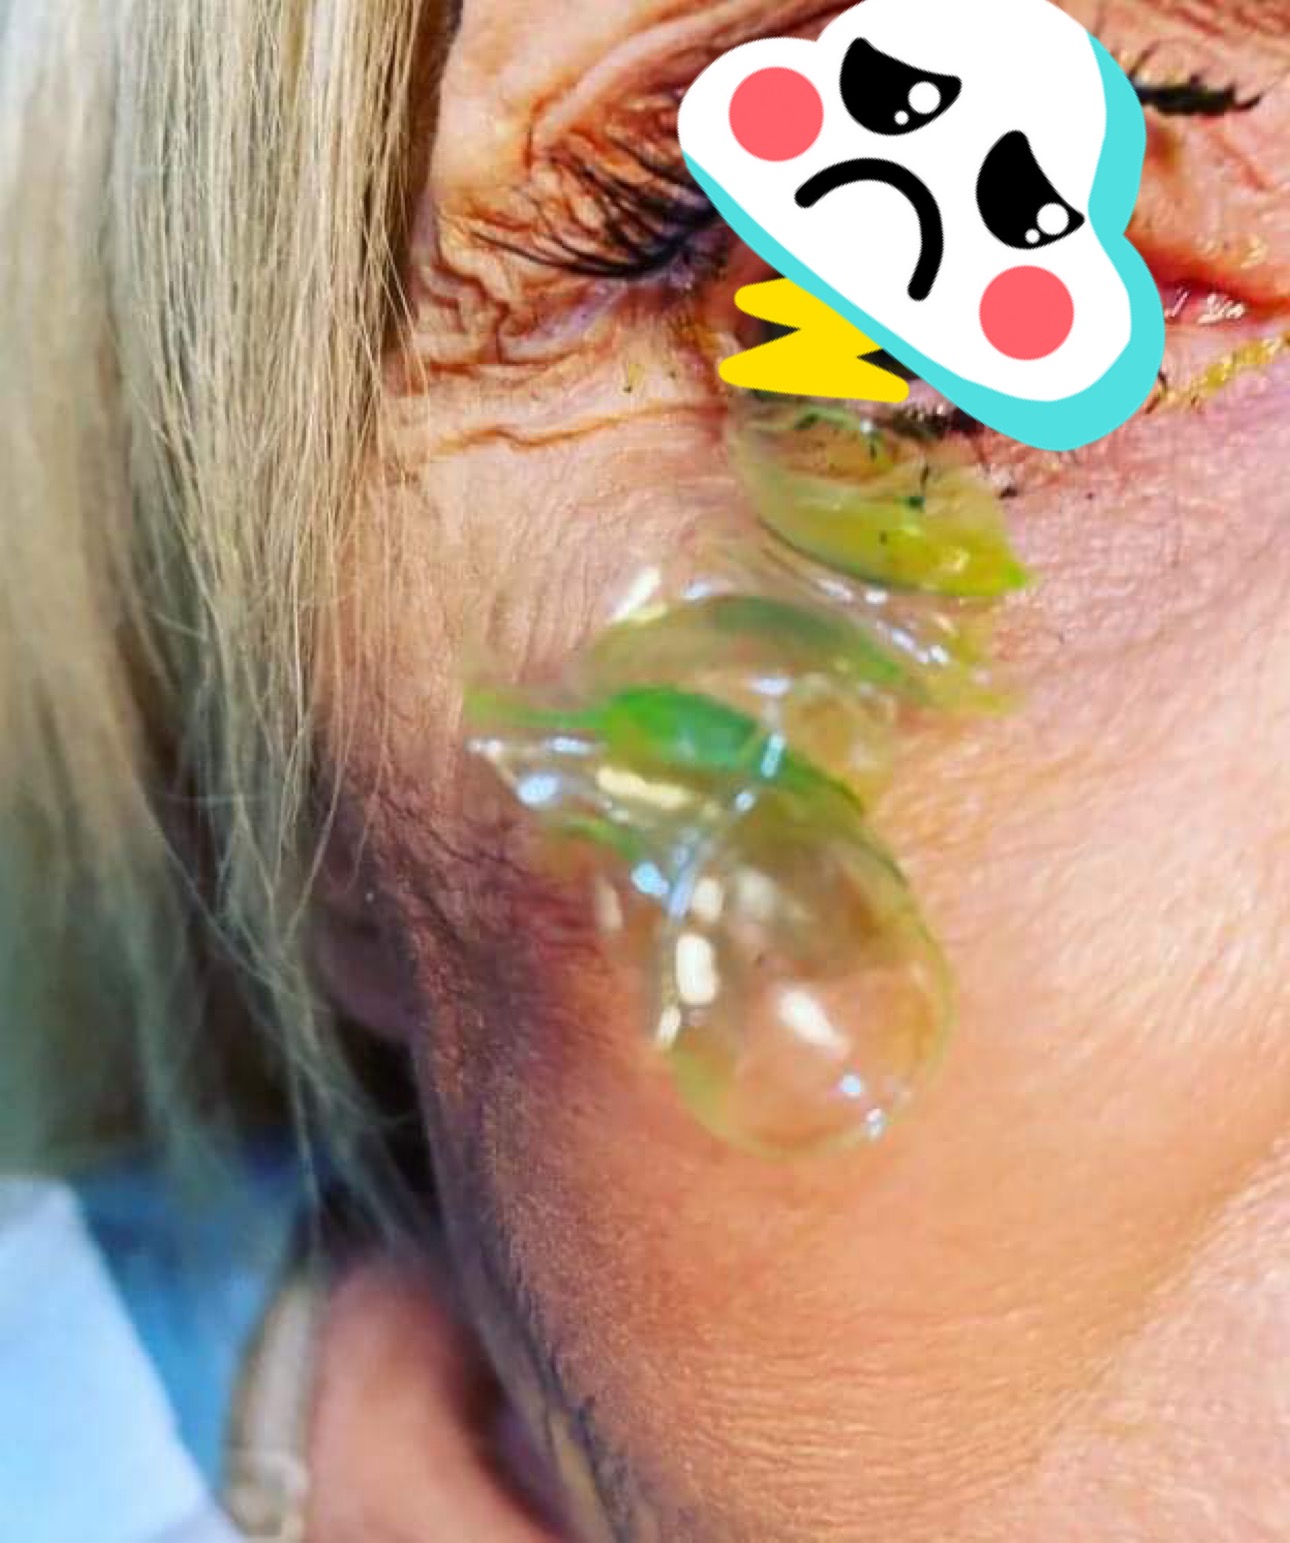 Doctor removes 23 contact lenses from woman who wore them during sleep 1